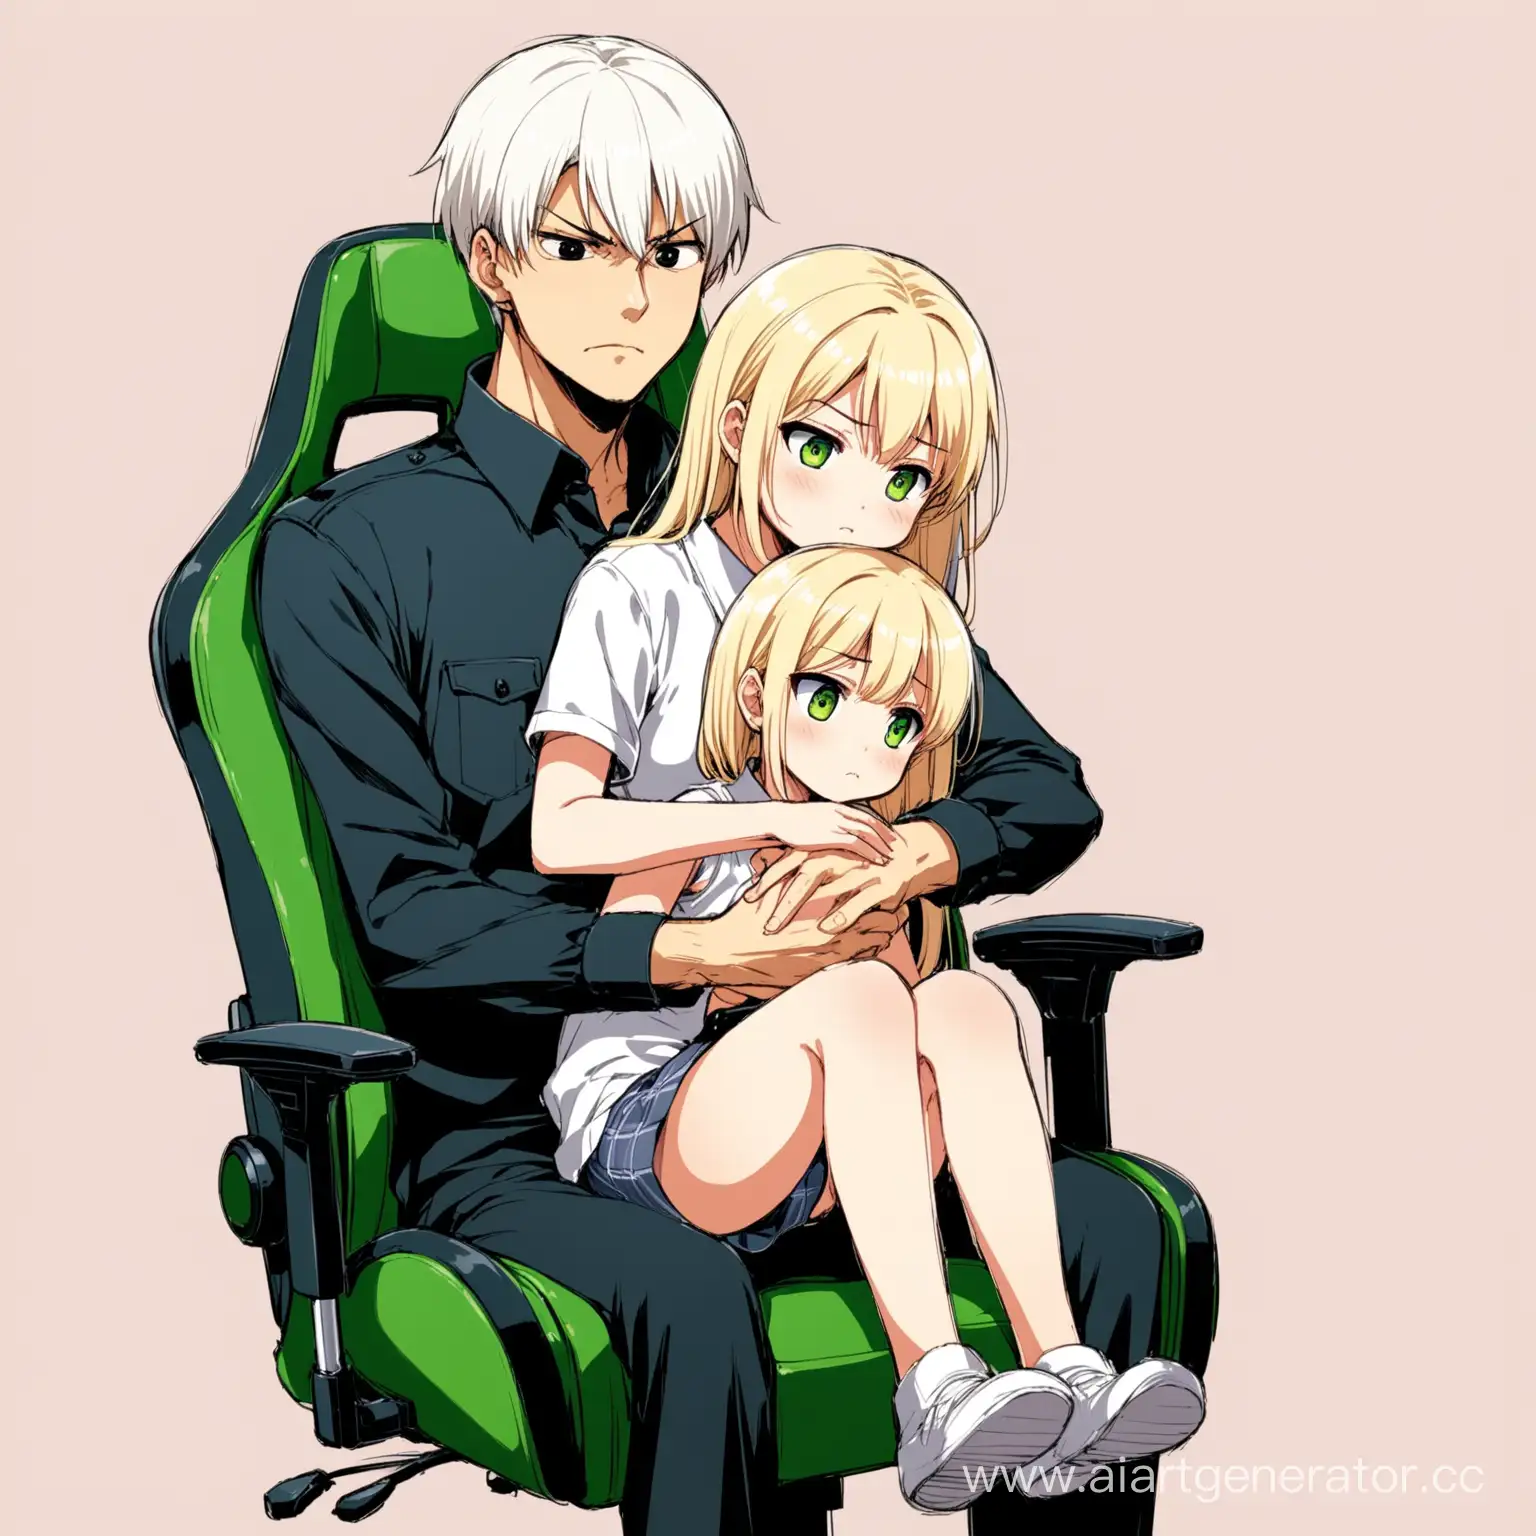 a guy with short white hair and black eyes, he is sitting at a computer in a gaming chair and playing a shooter, his face is unhappy, and a short girl with long straight blond hair and green eyes is sitting on his lap, sitting on his lap, and her legs were hanging off the chair from behind, she looks embarrassed, anime style